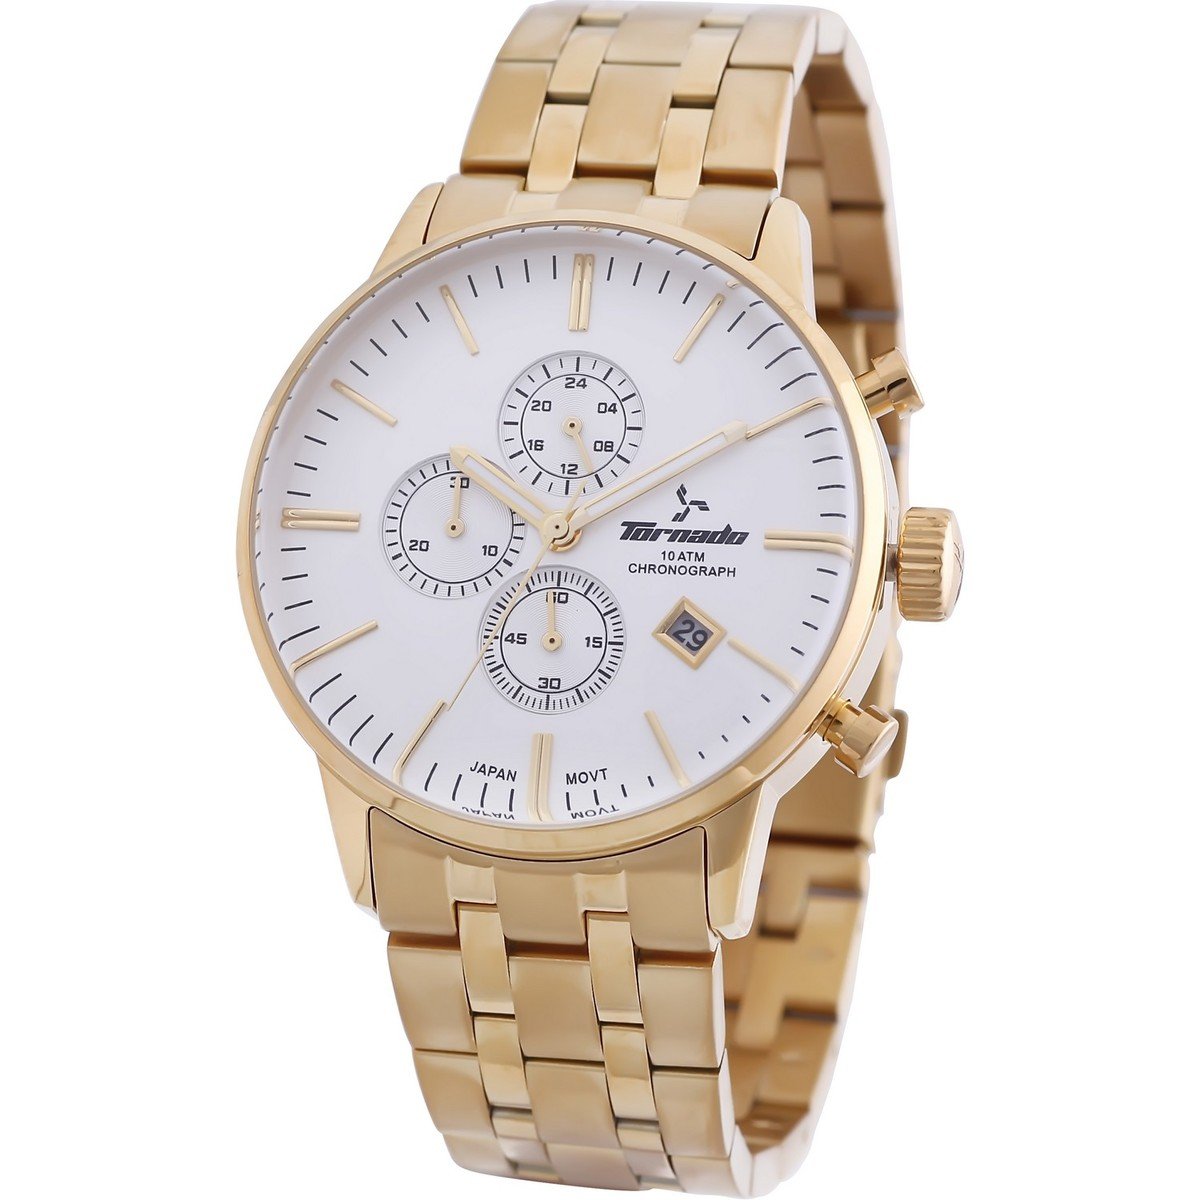 Tornado Men's Chronograph Watch White Dial Stainless Steel Gold Band- T6102-GBGW